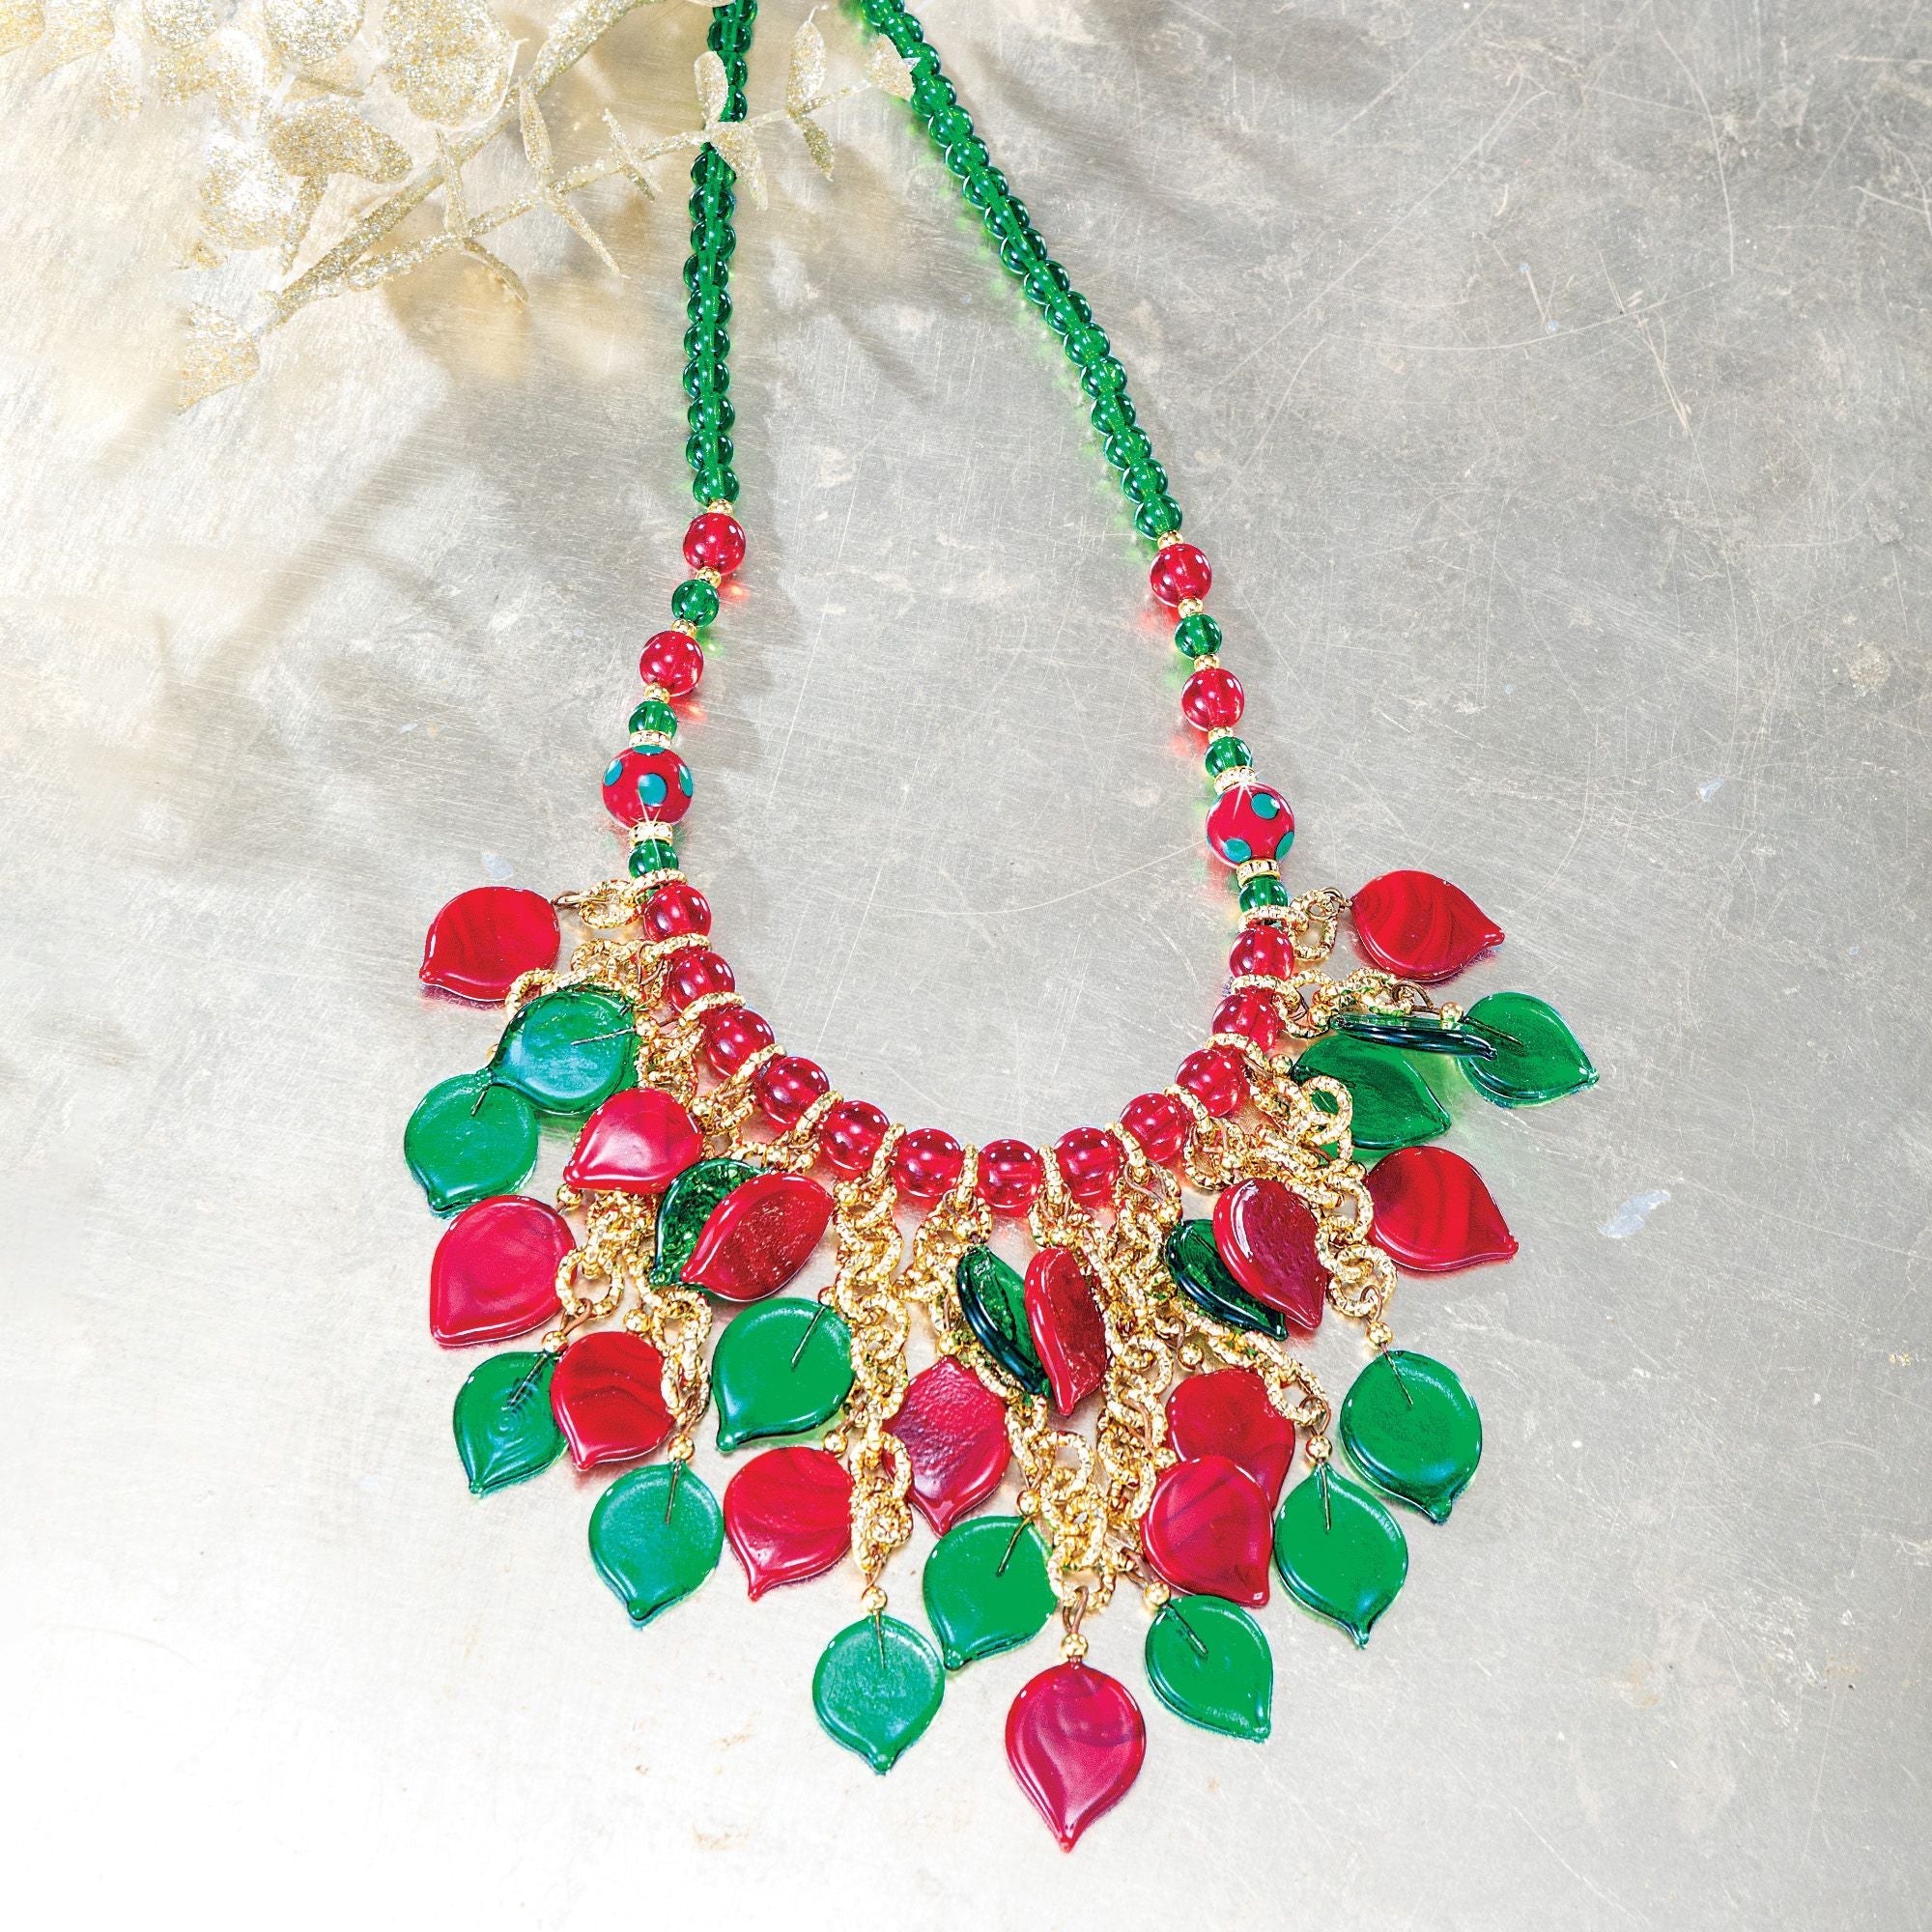 Shades Of Christmas Murano Glass Necklace